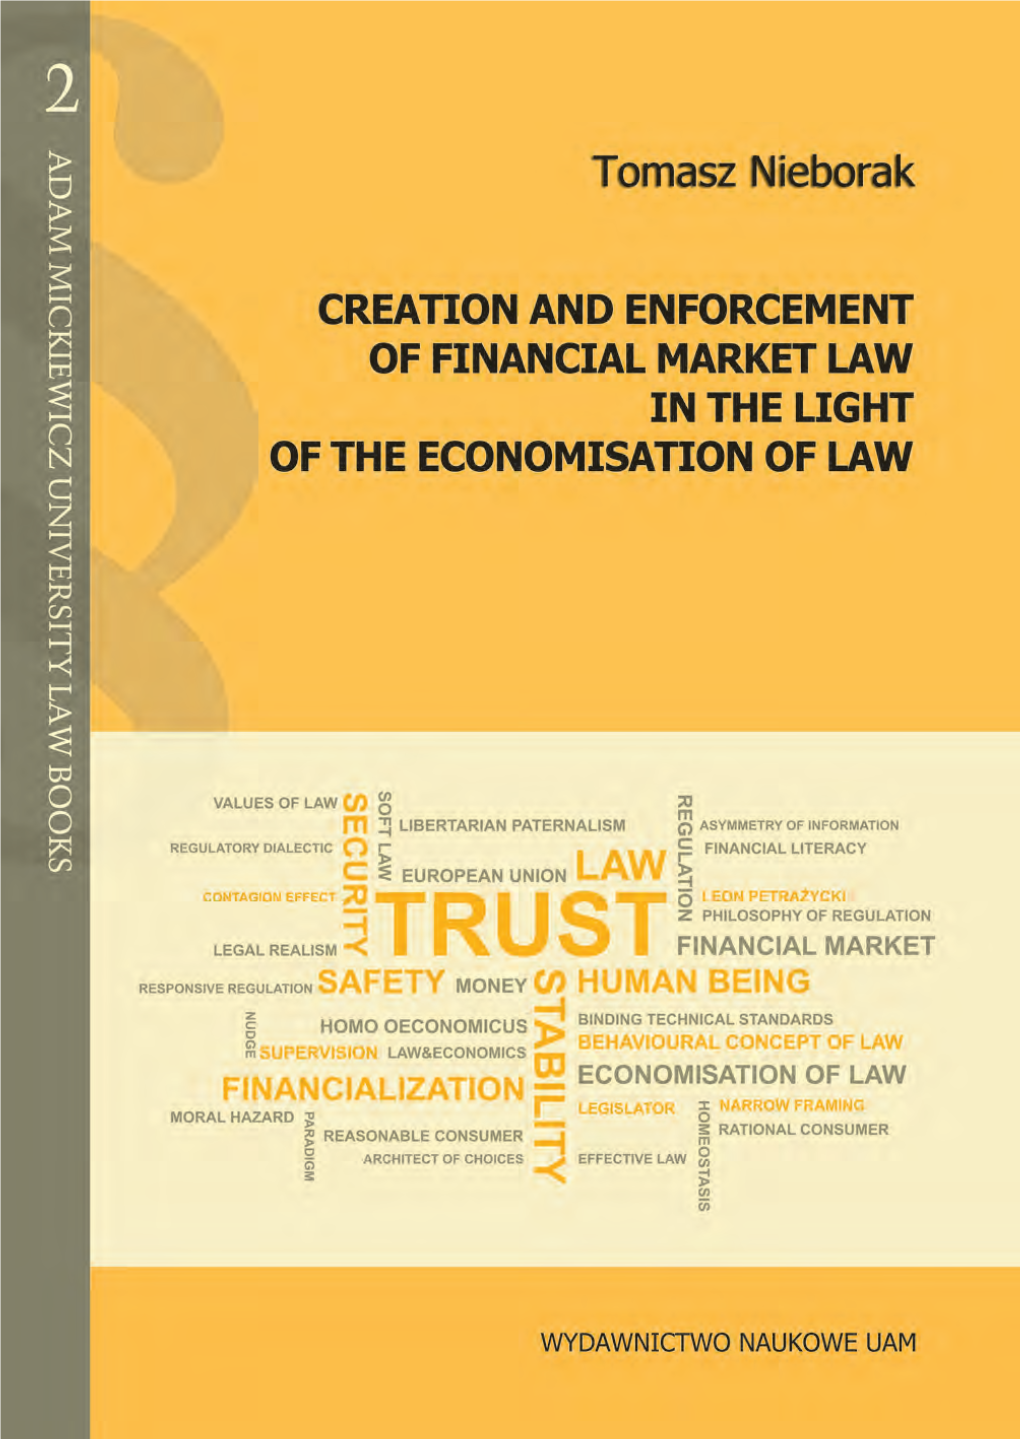 Creation and Enforcement of Financial Market Law in the Light of the Economisation of Law